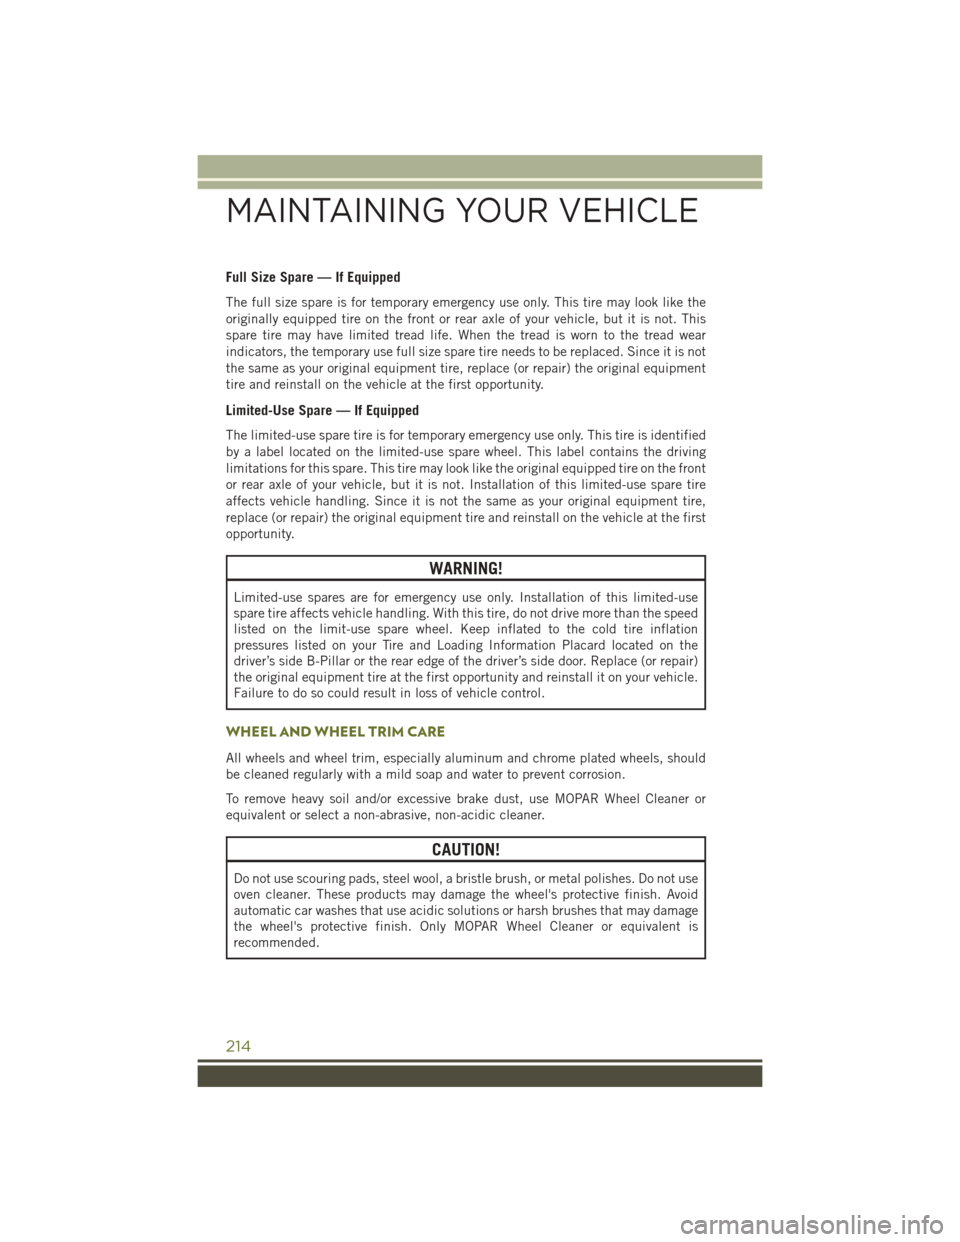 JEEP CHEROKEE 2016 KL / 5.G Manual PDF Full Size Spare — If Equipped
The full size spare is for temporary emergency use only. This tire may look like the
originally equipped tire on the front or rear axle of your vehicle, but it is not. 